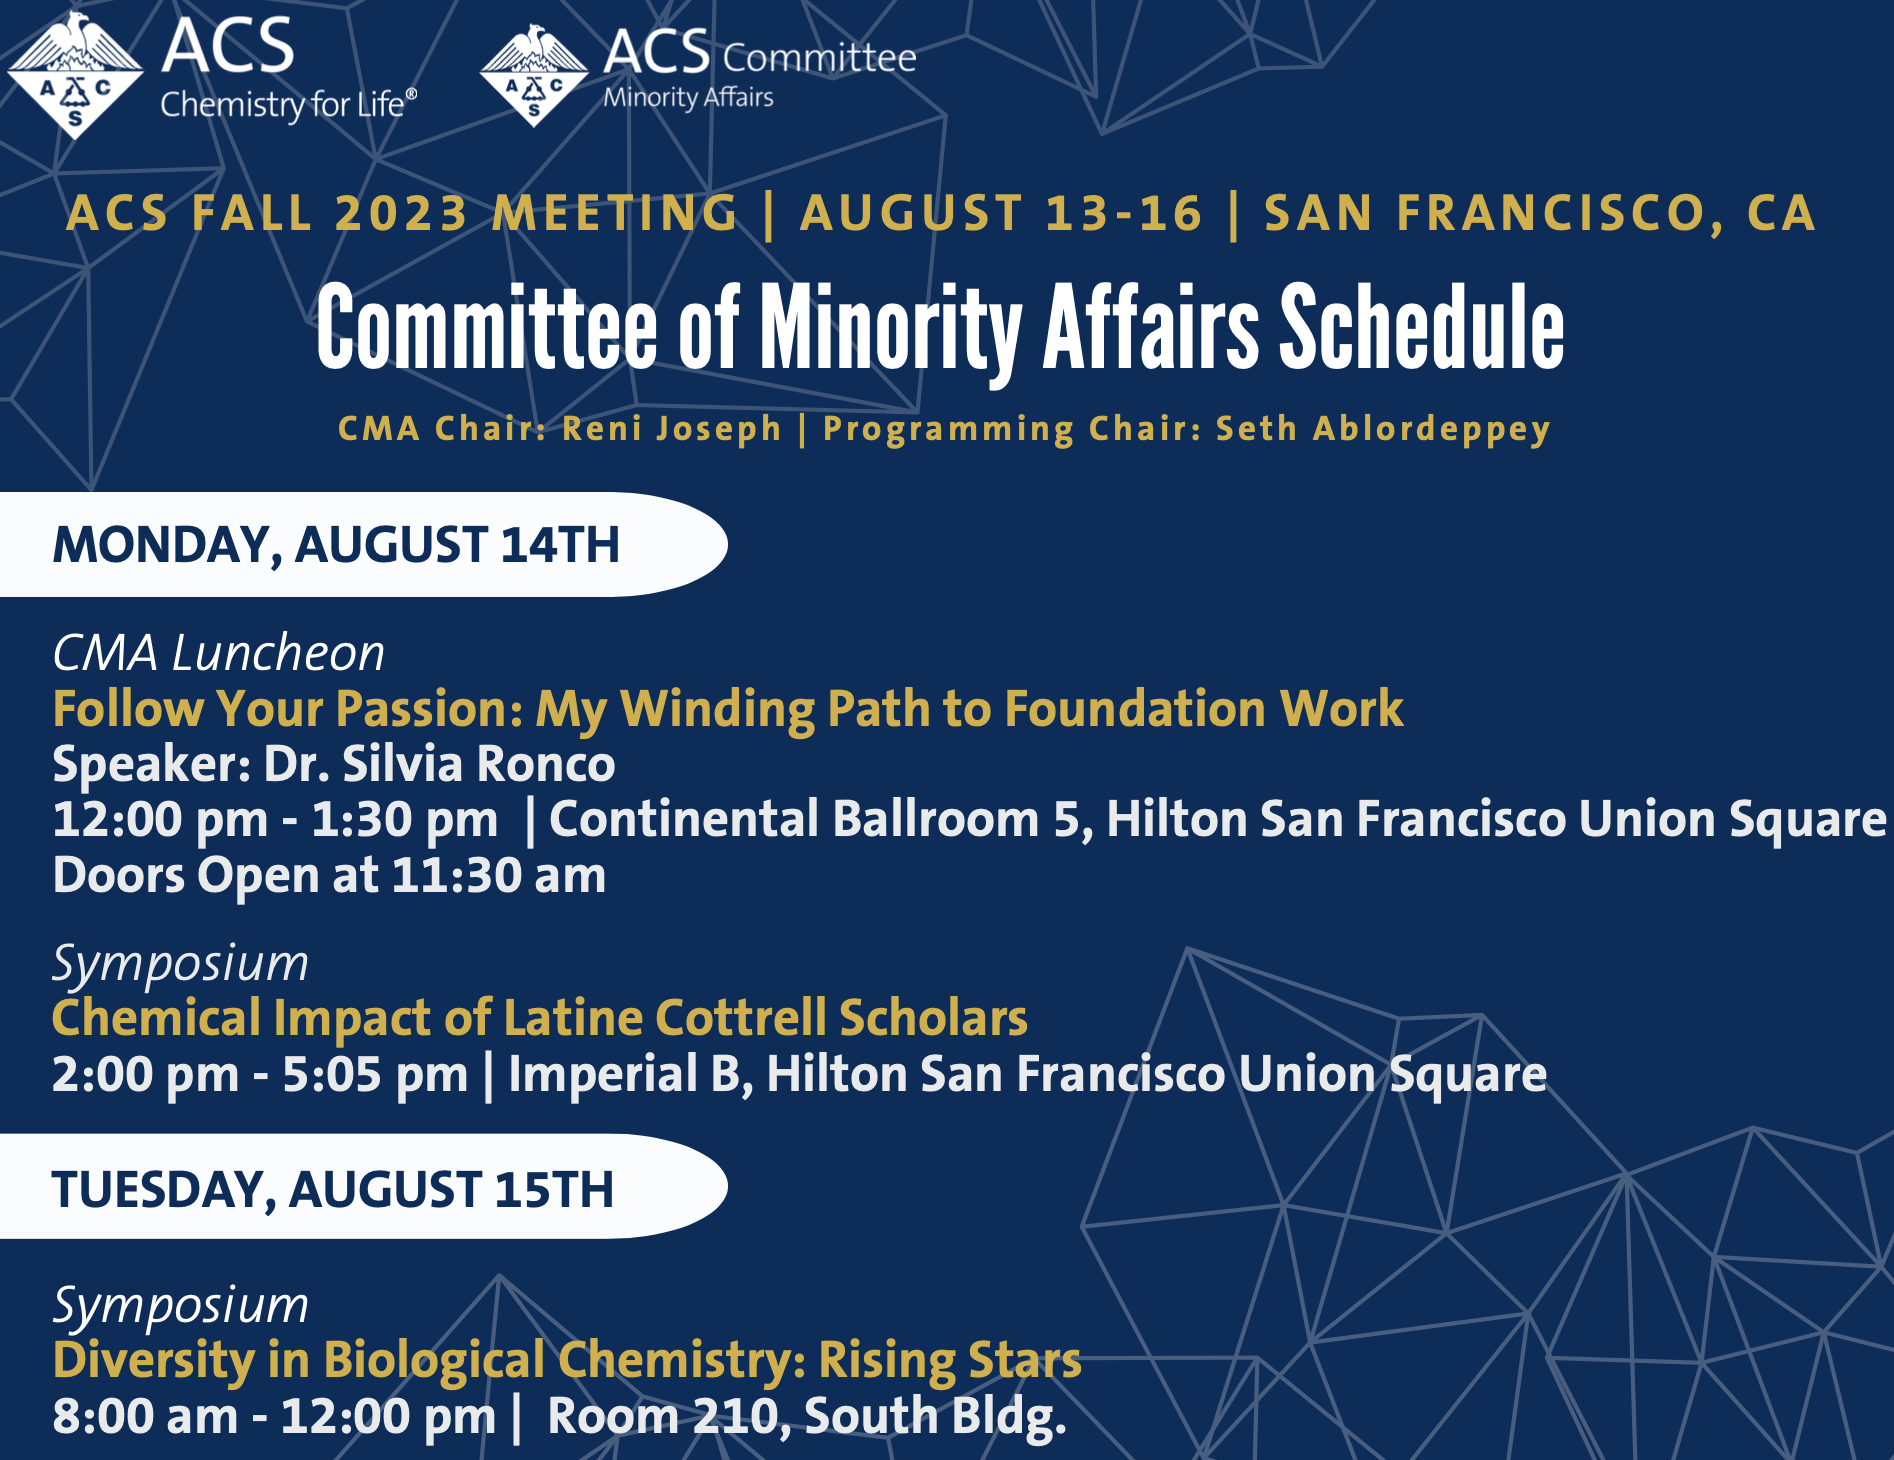 MONDAY, AUGUST 14TH
TUESDAY, AUGUST 15TH
ACS FALL 2023 MEETING | AUGUST 13-16 | SAN FRANCISCO, CA
Committee of Minority Affairs Schedule
CMA Chair: Reni Joseph | Programming Chair: Seth Ablordeppey
CMA Luncheon
Follow Your Passion: My Winding Path to Foundation Work
Speaker: Dr. Silvia Ronco
12:00 pm - 1:30 pm | Continental Ballroom 5, Hilton San Francisco Union Square Doors Open at 11:30 am
Symposium
Chemical Impact of Latine Cottrell Scholars
2:00 pm - 5:05 pm | Imperial B, Hilton San Francisco Union Square
Symposium
Diversity in Biological Chemistry: Rising Stars
8:00 am - 12:00 pm | Room 210, South Bldg.